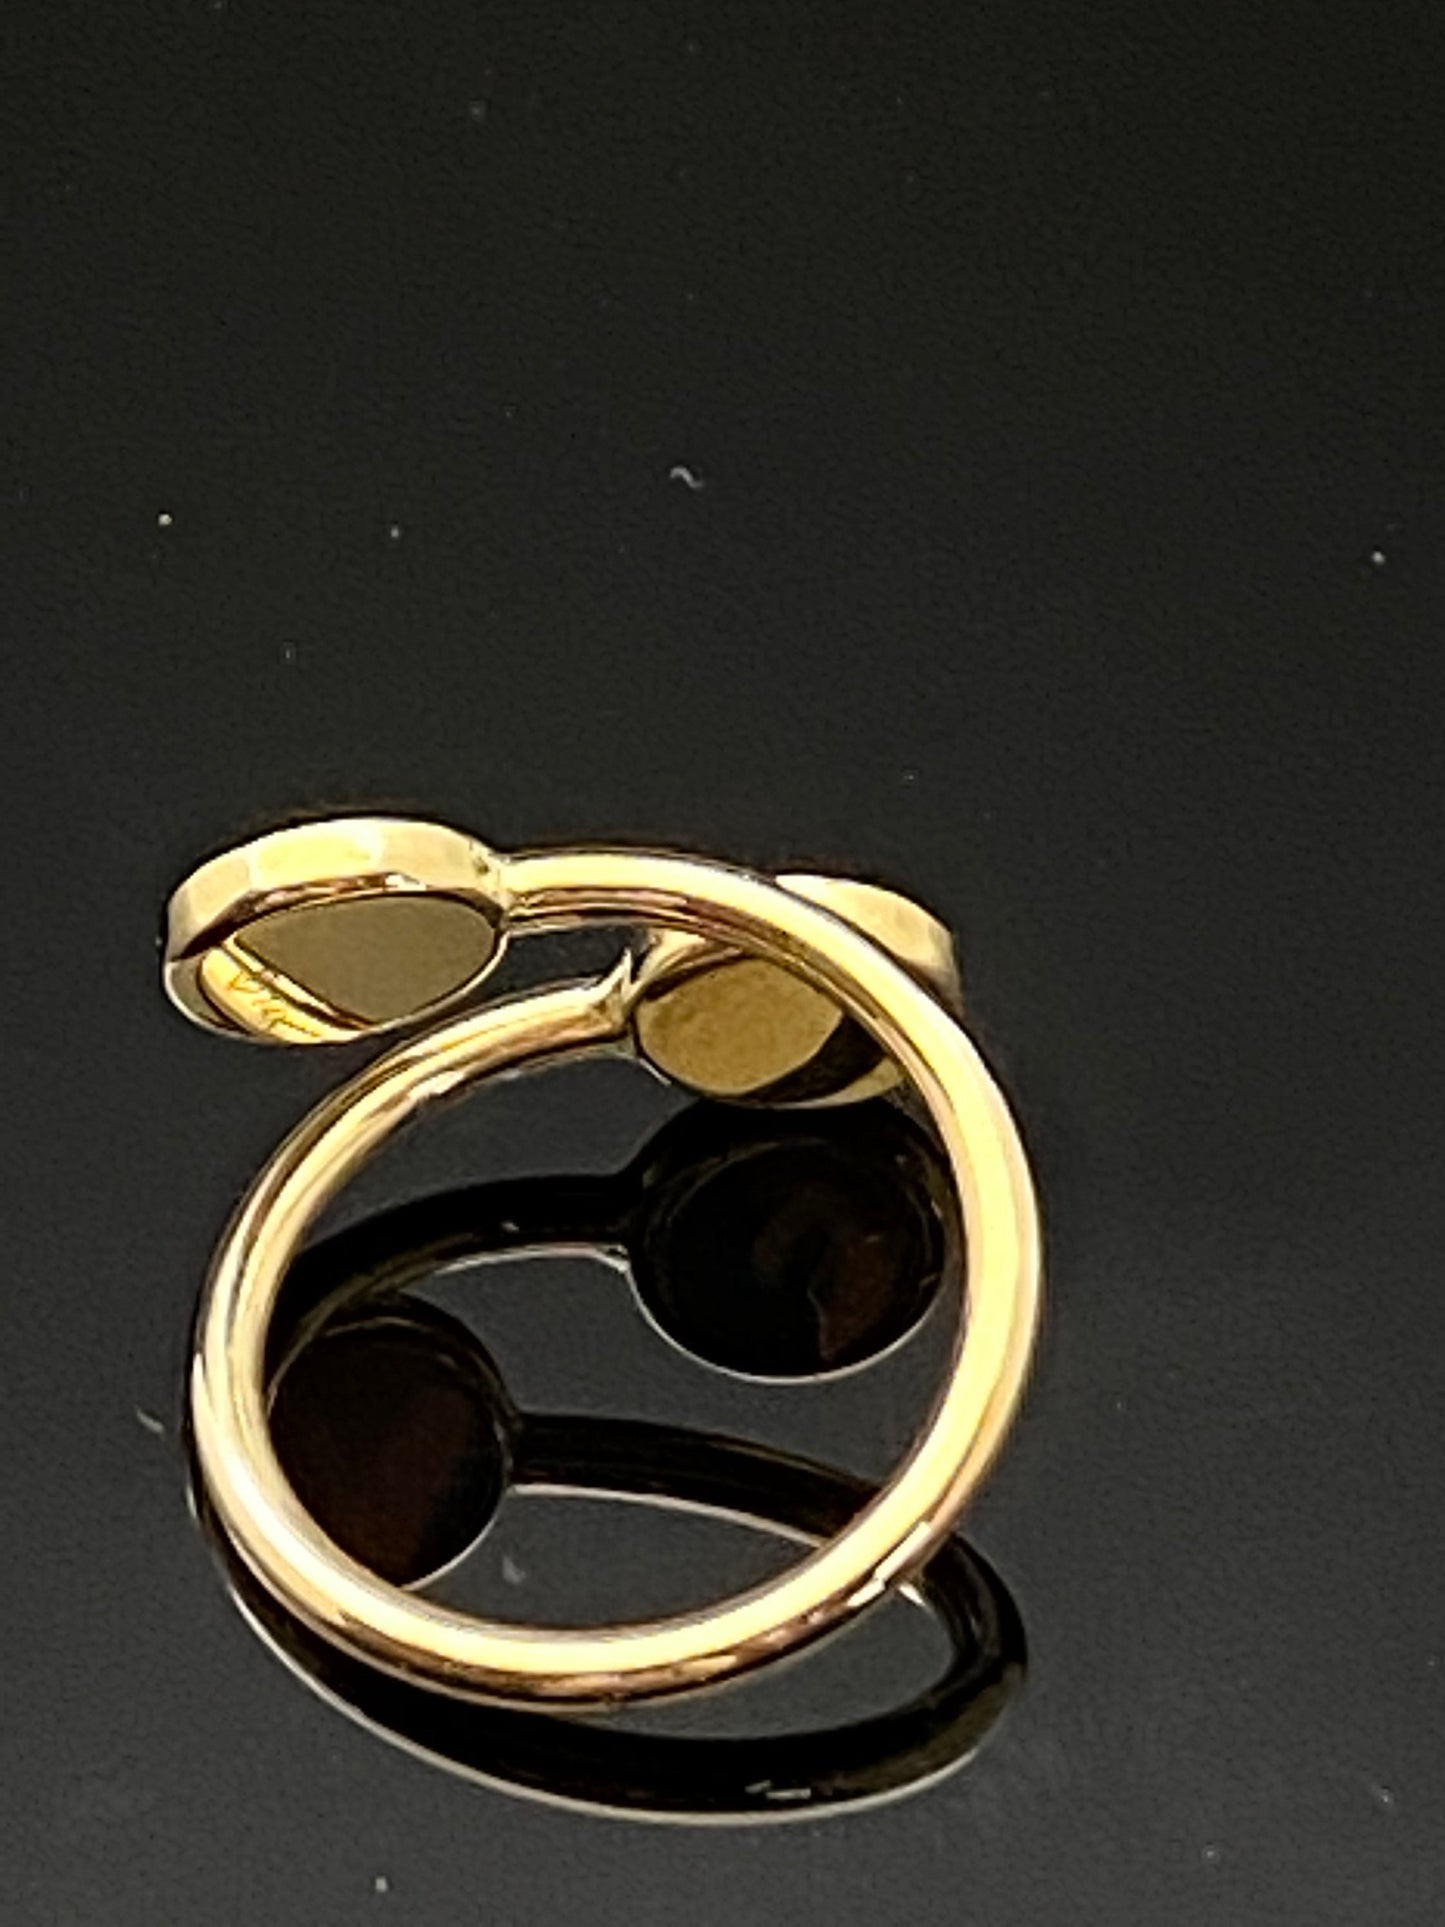 Yellow Gold Round Disc Bypass Design Modernist Adjustable Band Ring